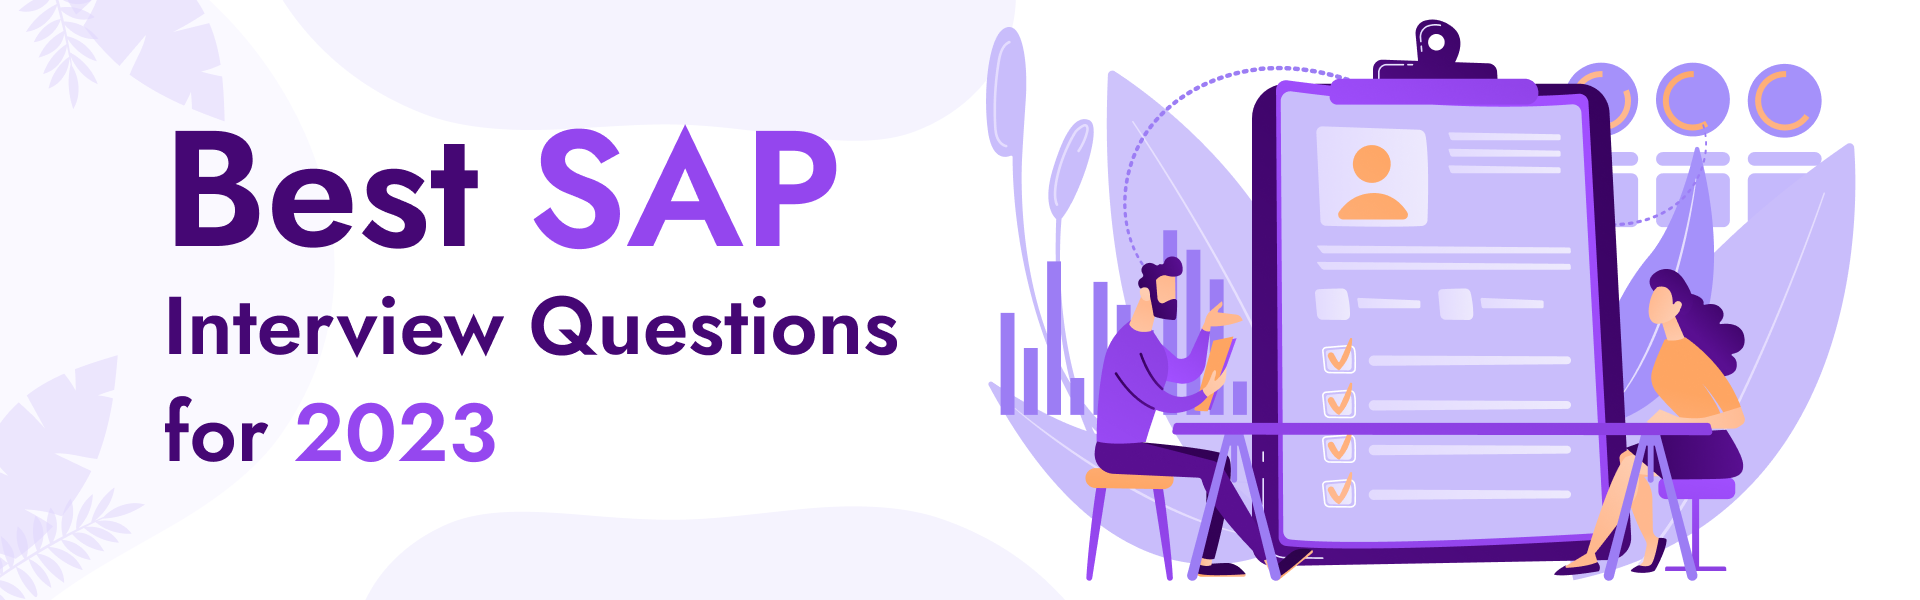 Best SAP Interview Questions for 2023